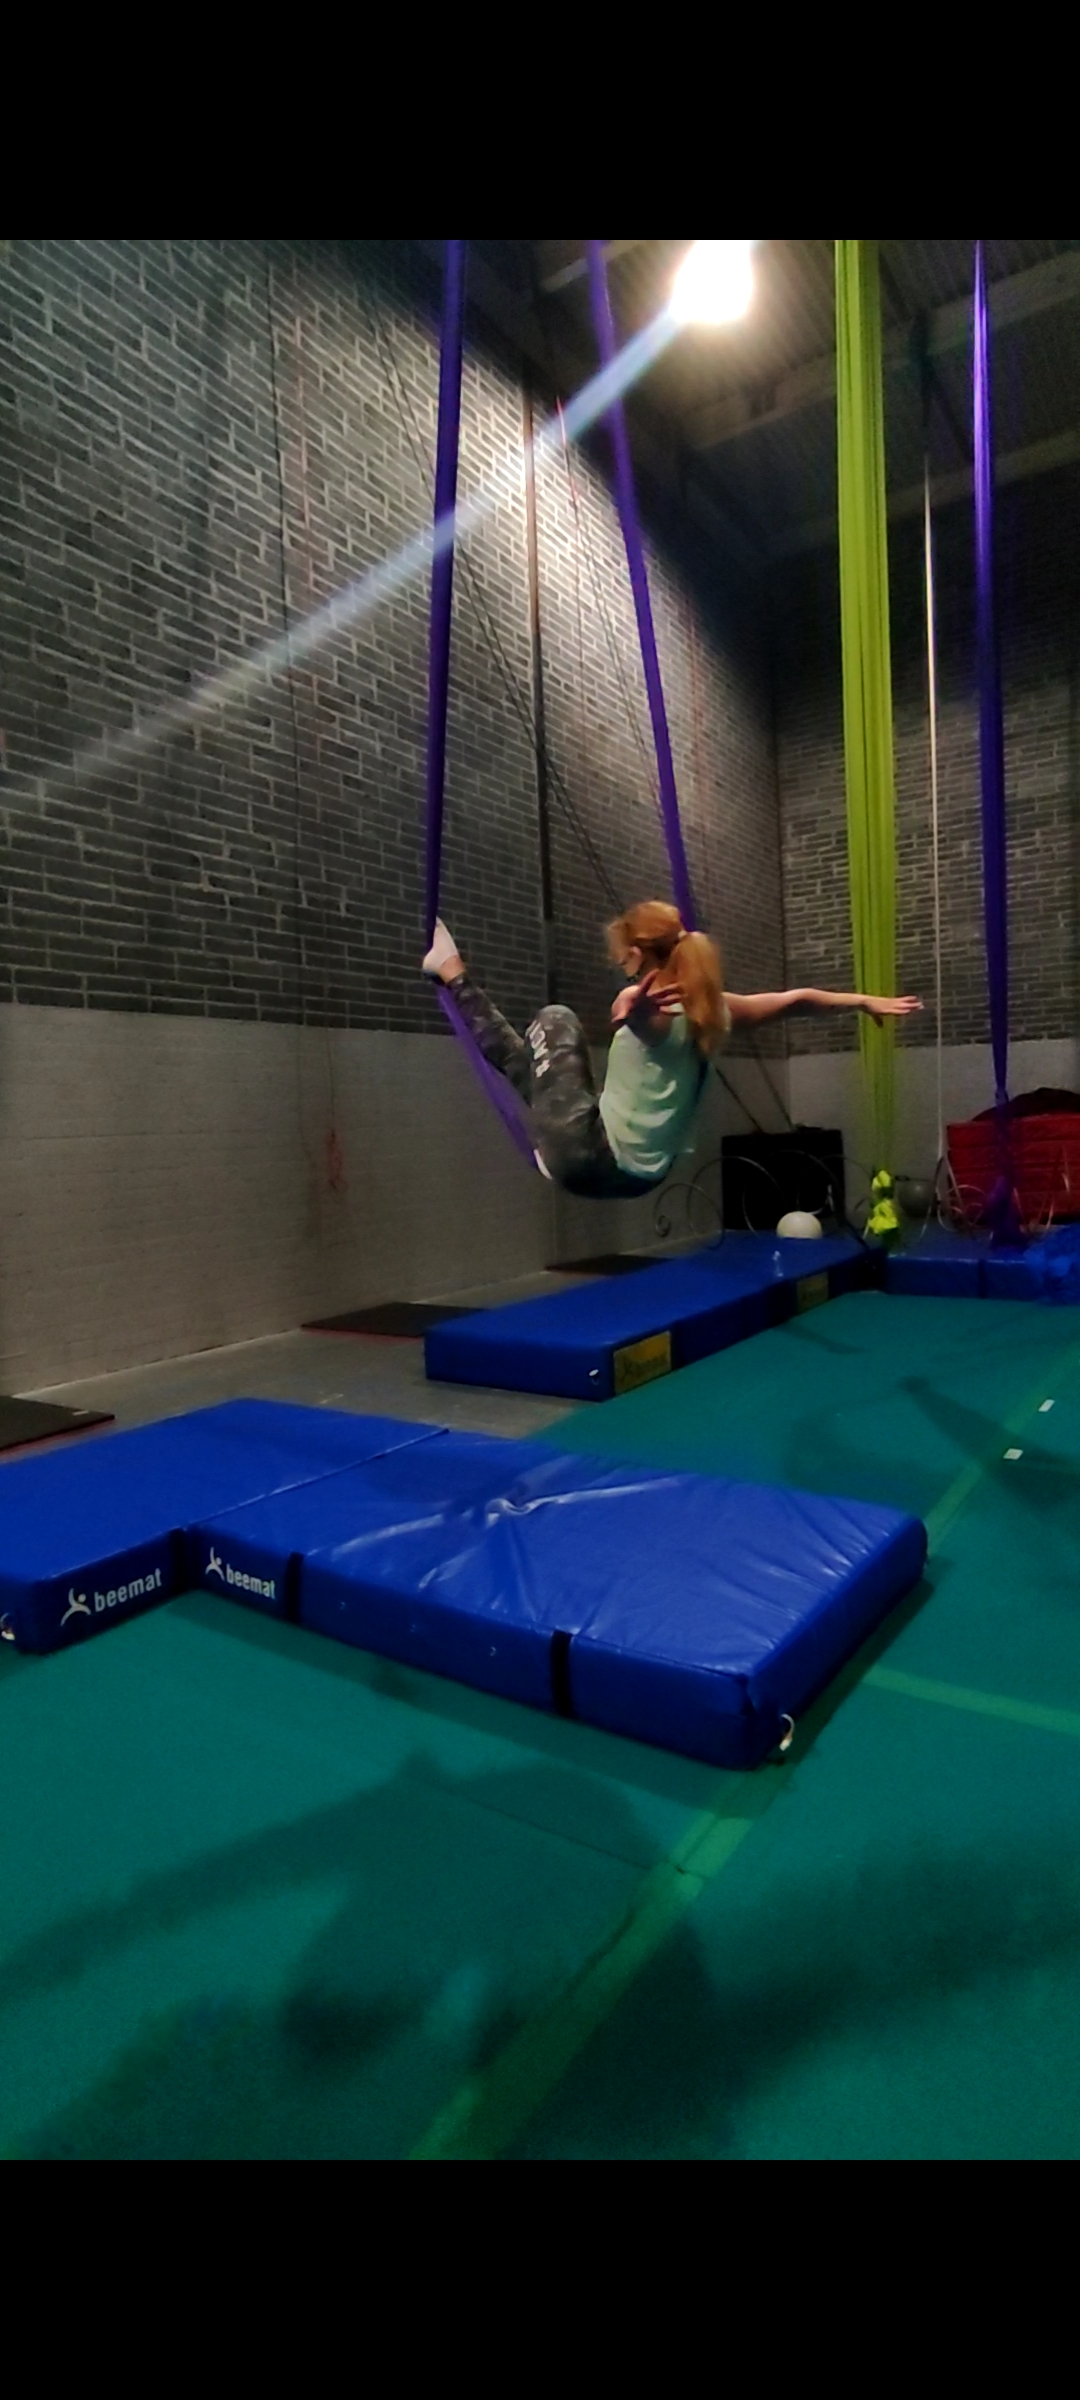 why not try something new and fun - such as a aerial dance class? 